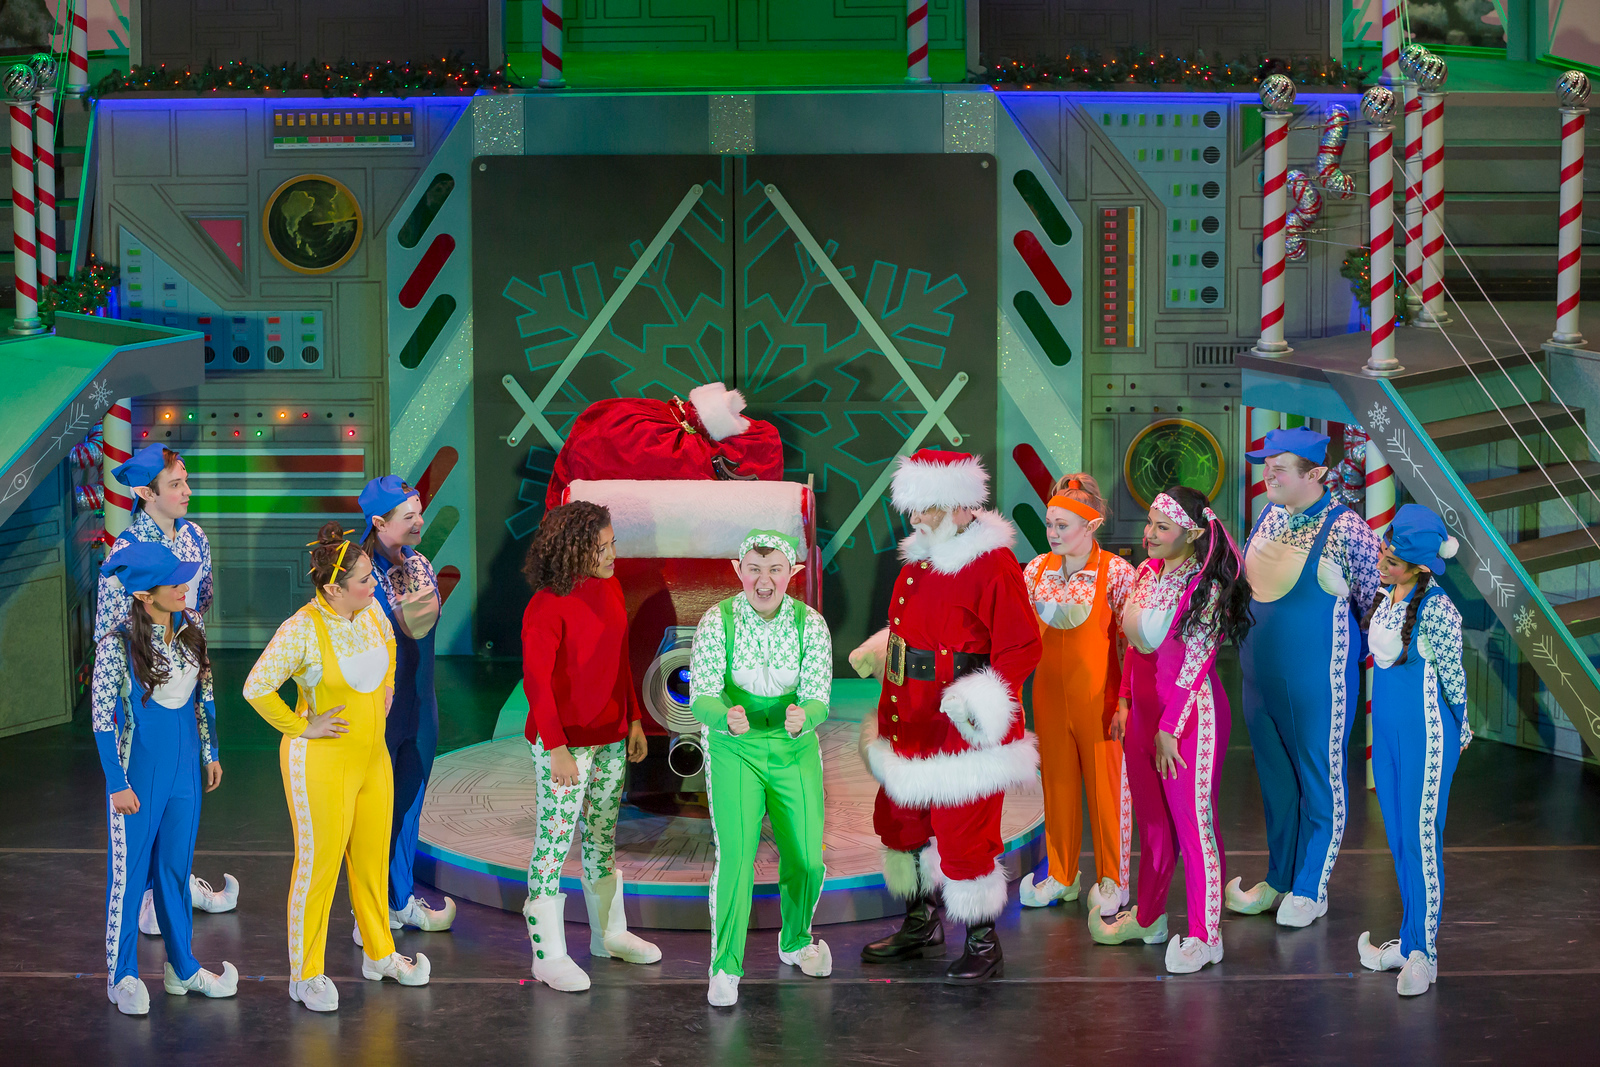 Santa and elves on stage